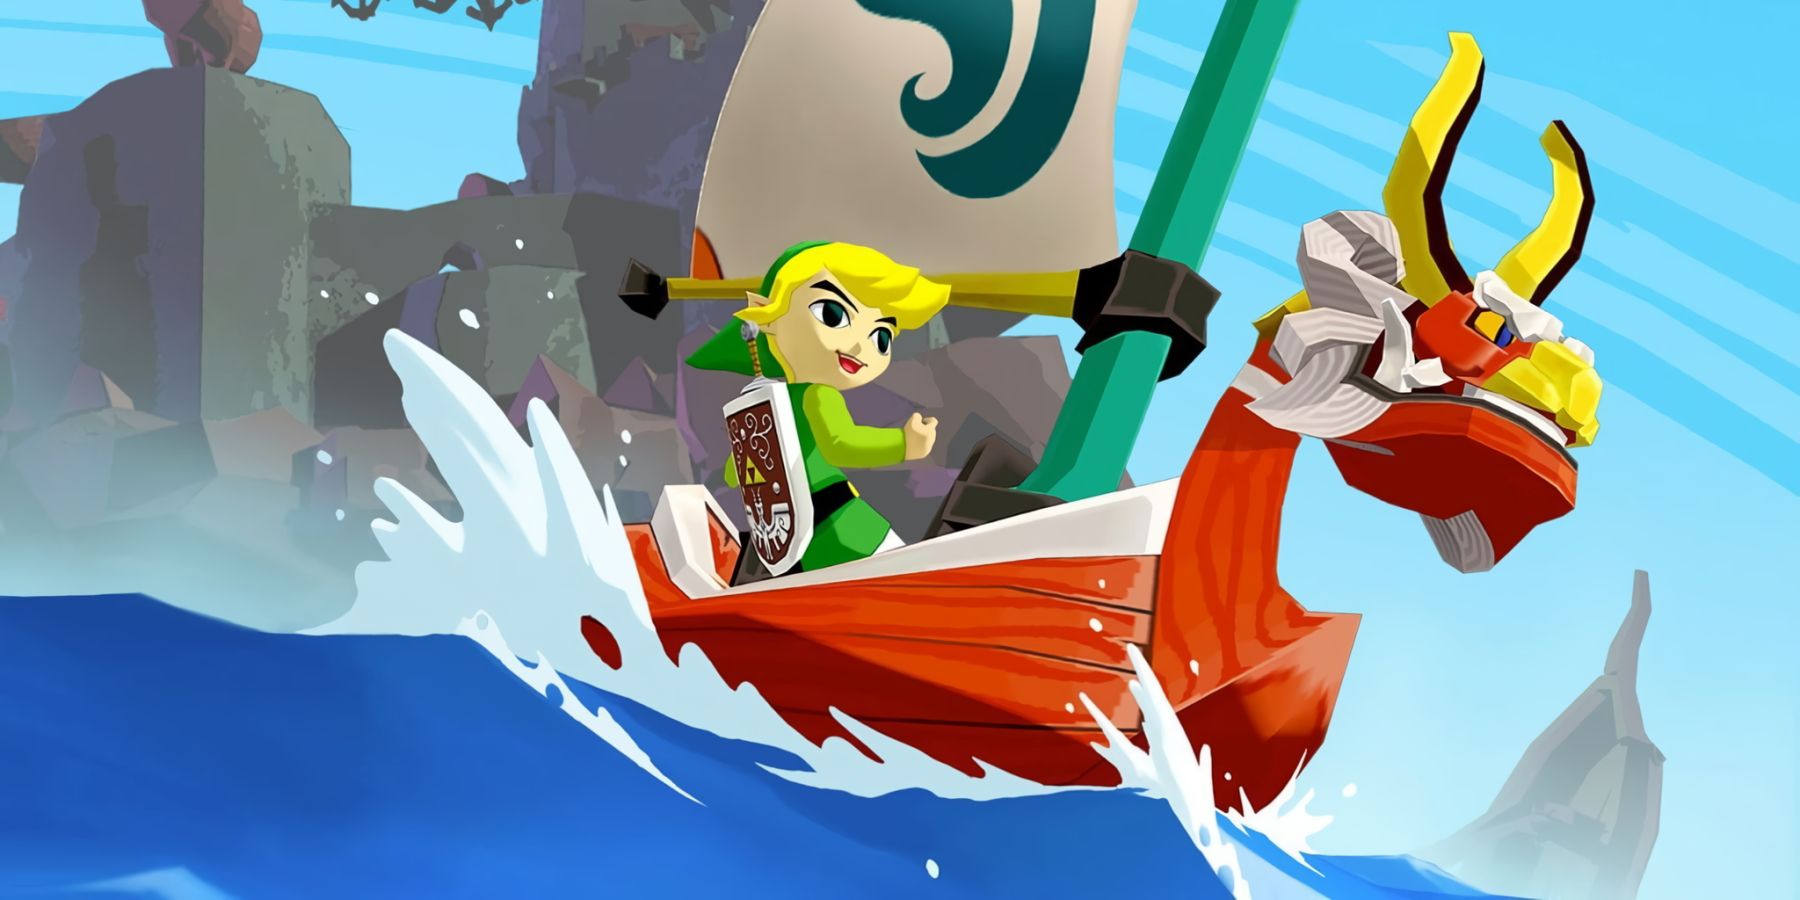 A key visual for The Legend of Zelda: The Wind Waker